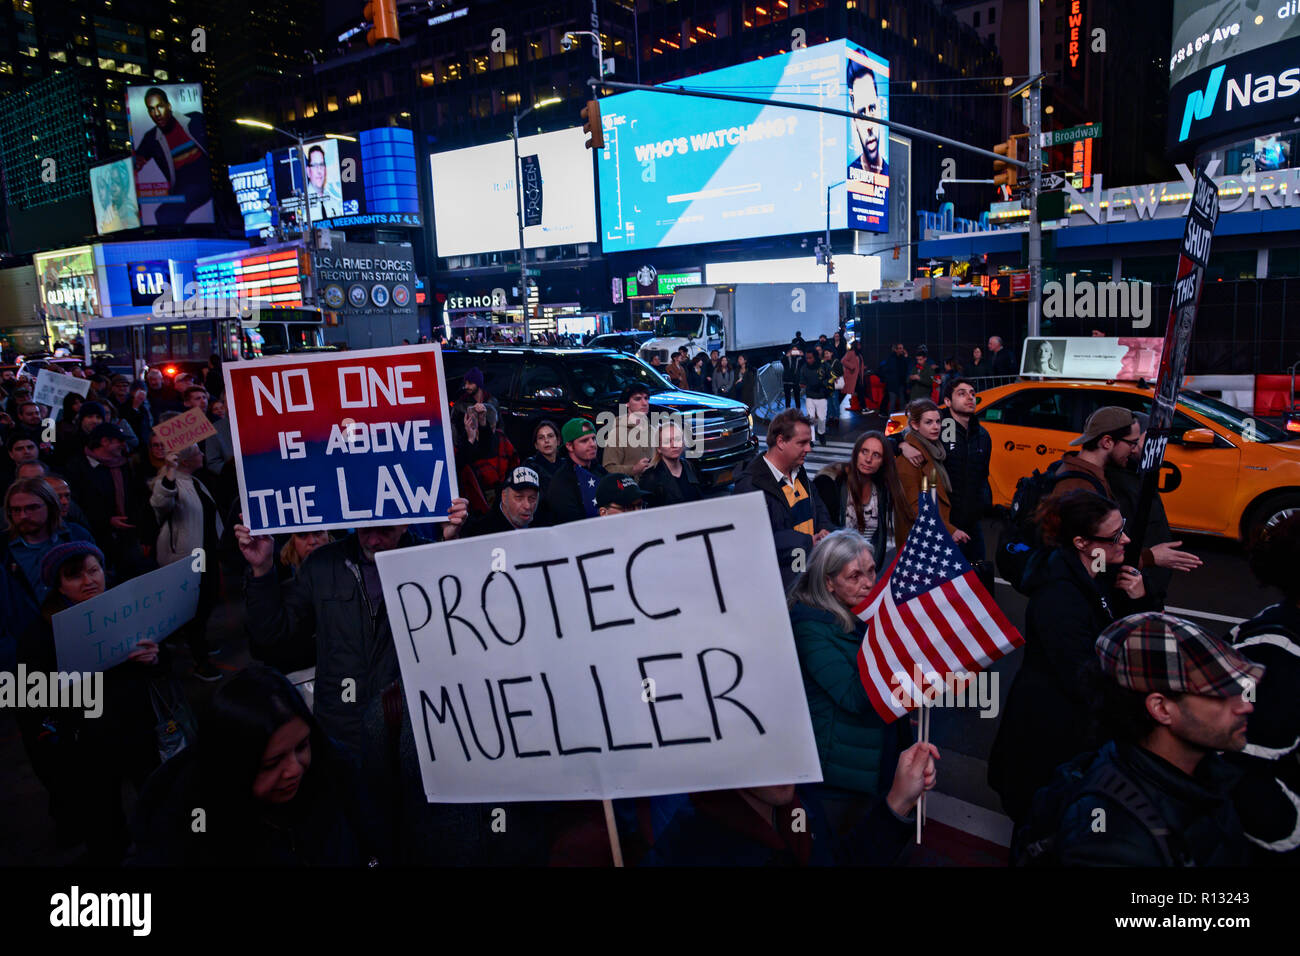 New York, USA. November 8, 2018 Thousands of people marched from Times Square to Union Square during the evening rush hour to protest against the departure of Jeff Sessions as the Trump administration’s attorney general and to defend the Mueller Russia investigation.  The march was one of dozens scheduled for 5 p.m. local time in cities across the USA., according to advocacy group MoveOn.org Civic Action. Credit: Joseph Reid/Alamy Live News Stock Photo